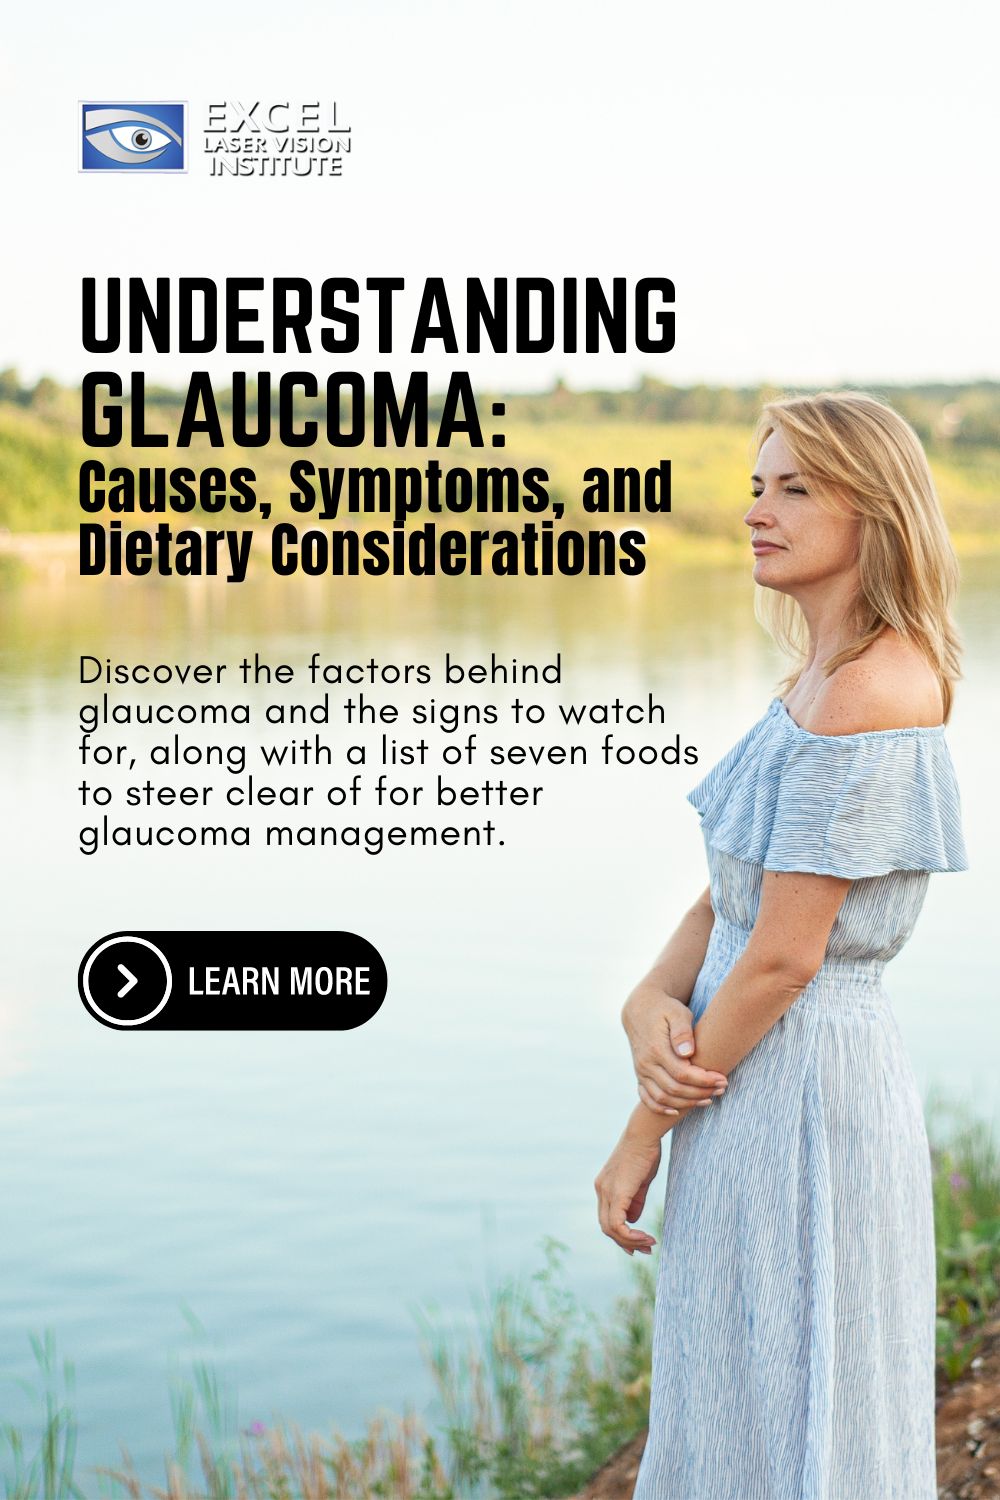 woman-looking-towards-the-water-blog-title-Understanding-Glaucoma-Causes-Symptoms-and-Dietary-Considerations-pinterest